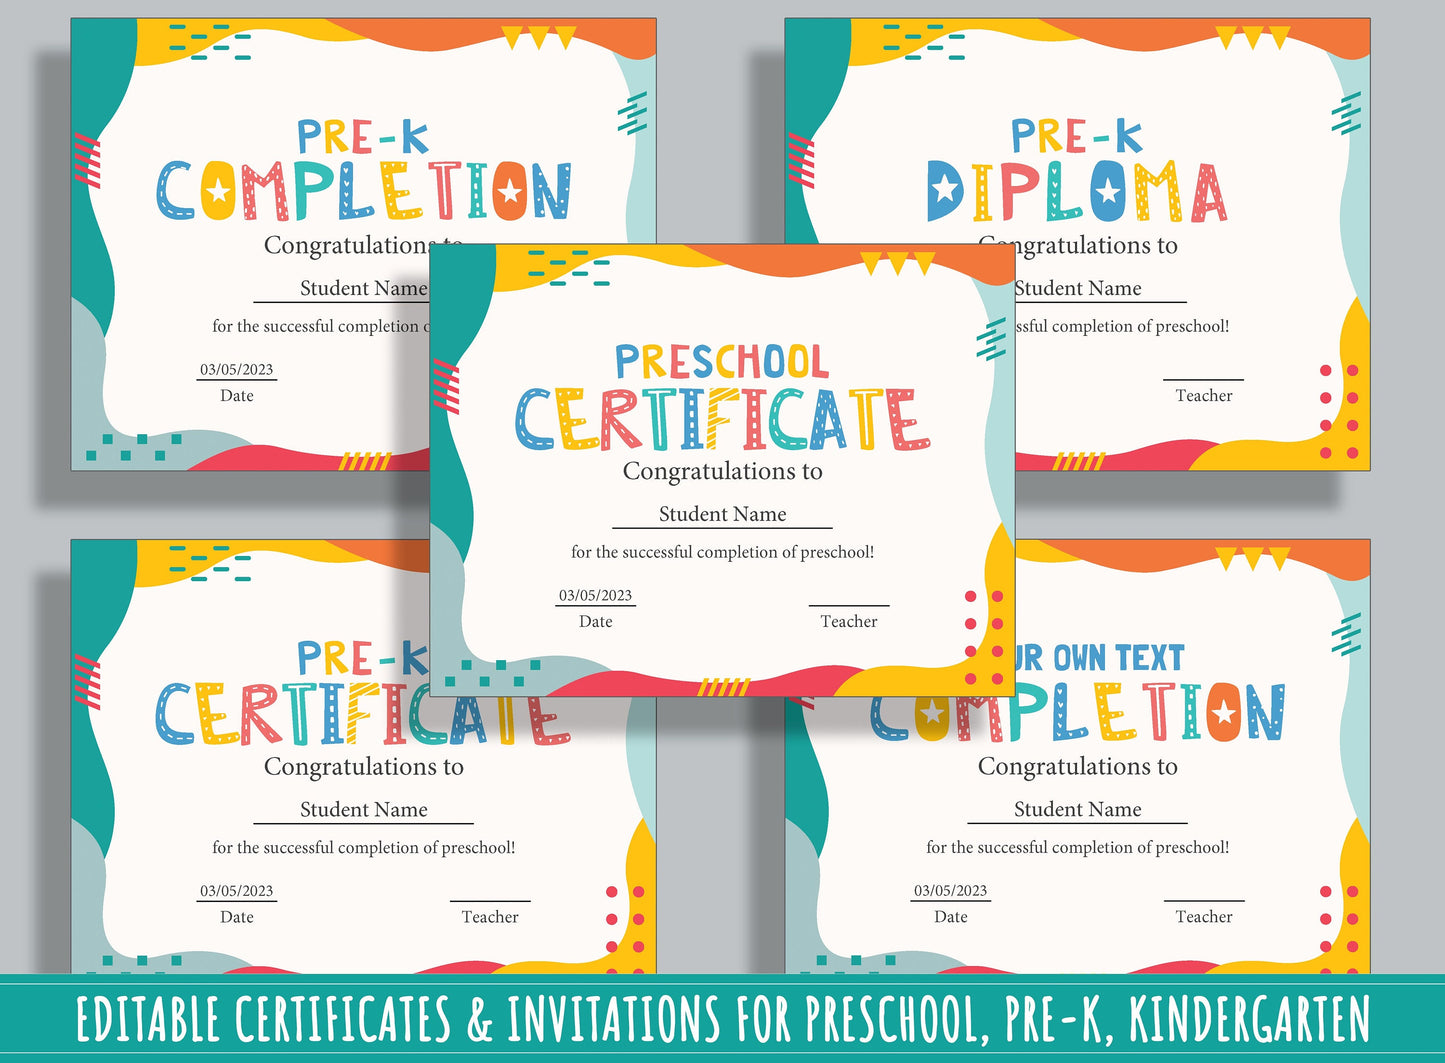 Diploma Certificate for Preschool and Elementary School Kids, 37 Editable Pages for Celebrations and Events, PDF File, Instant Download